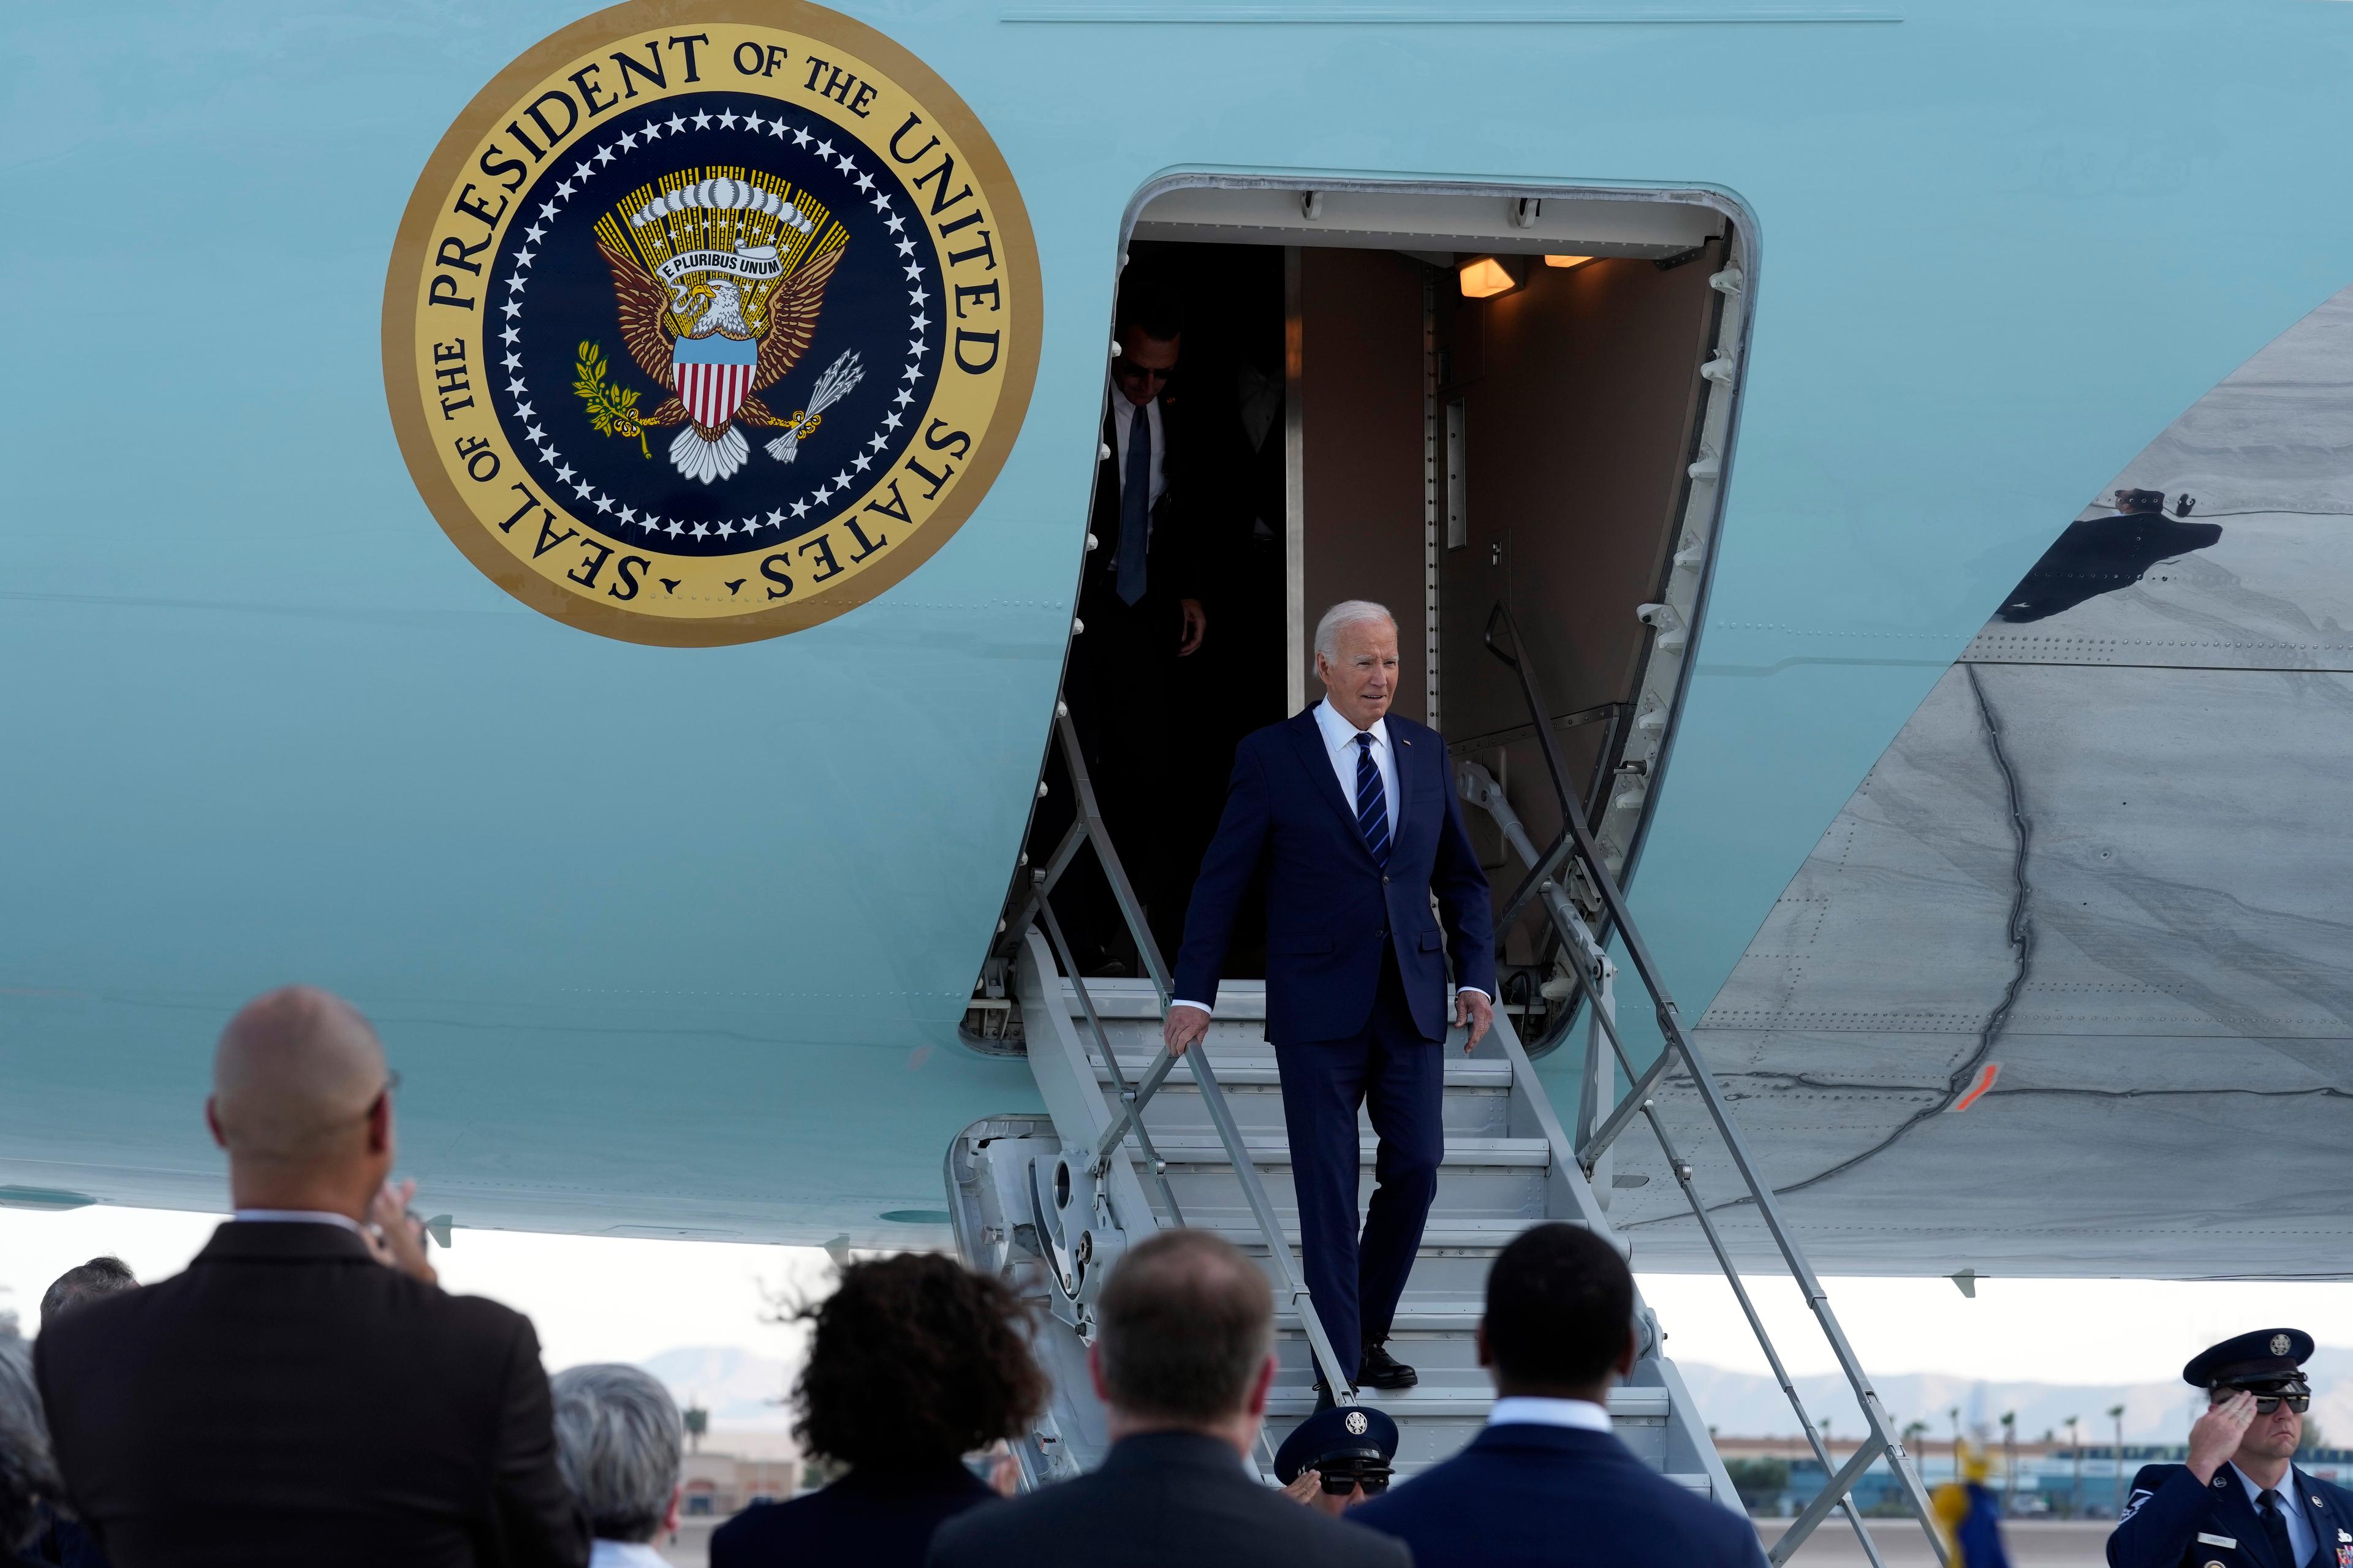 President Joe Biden walks down a flight of stairs out of an airplane while people watch.